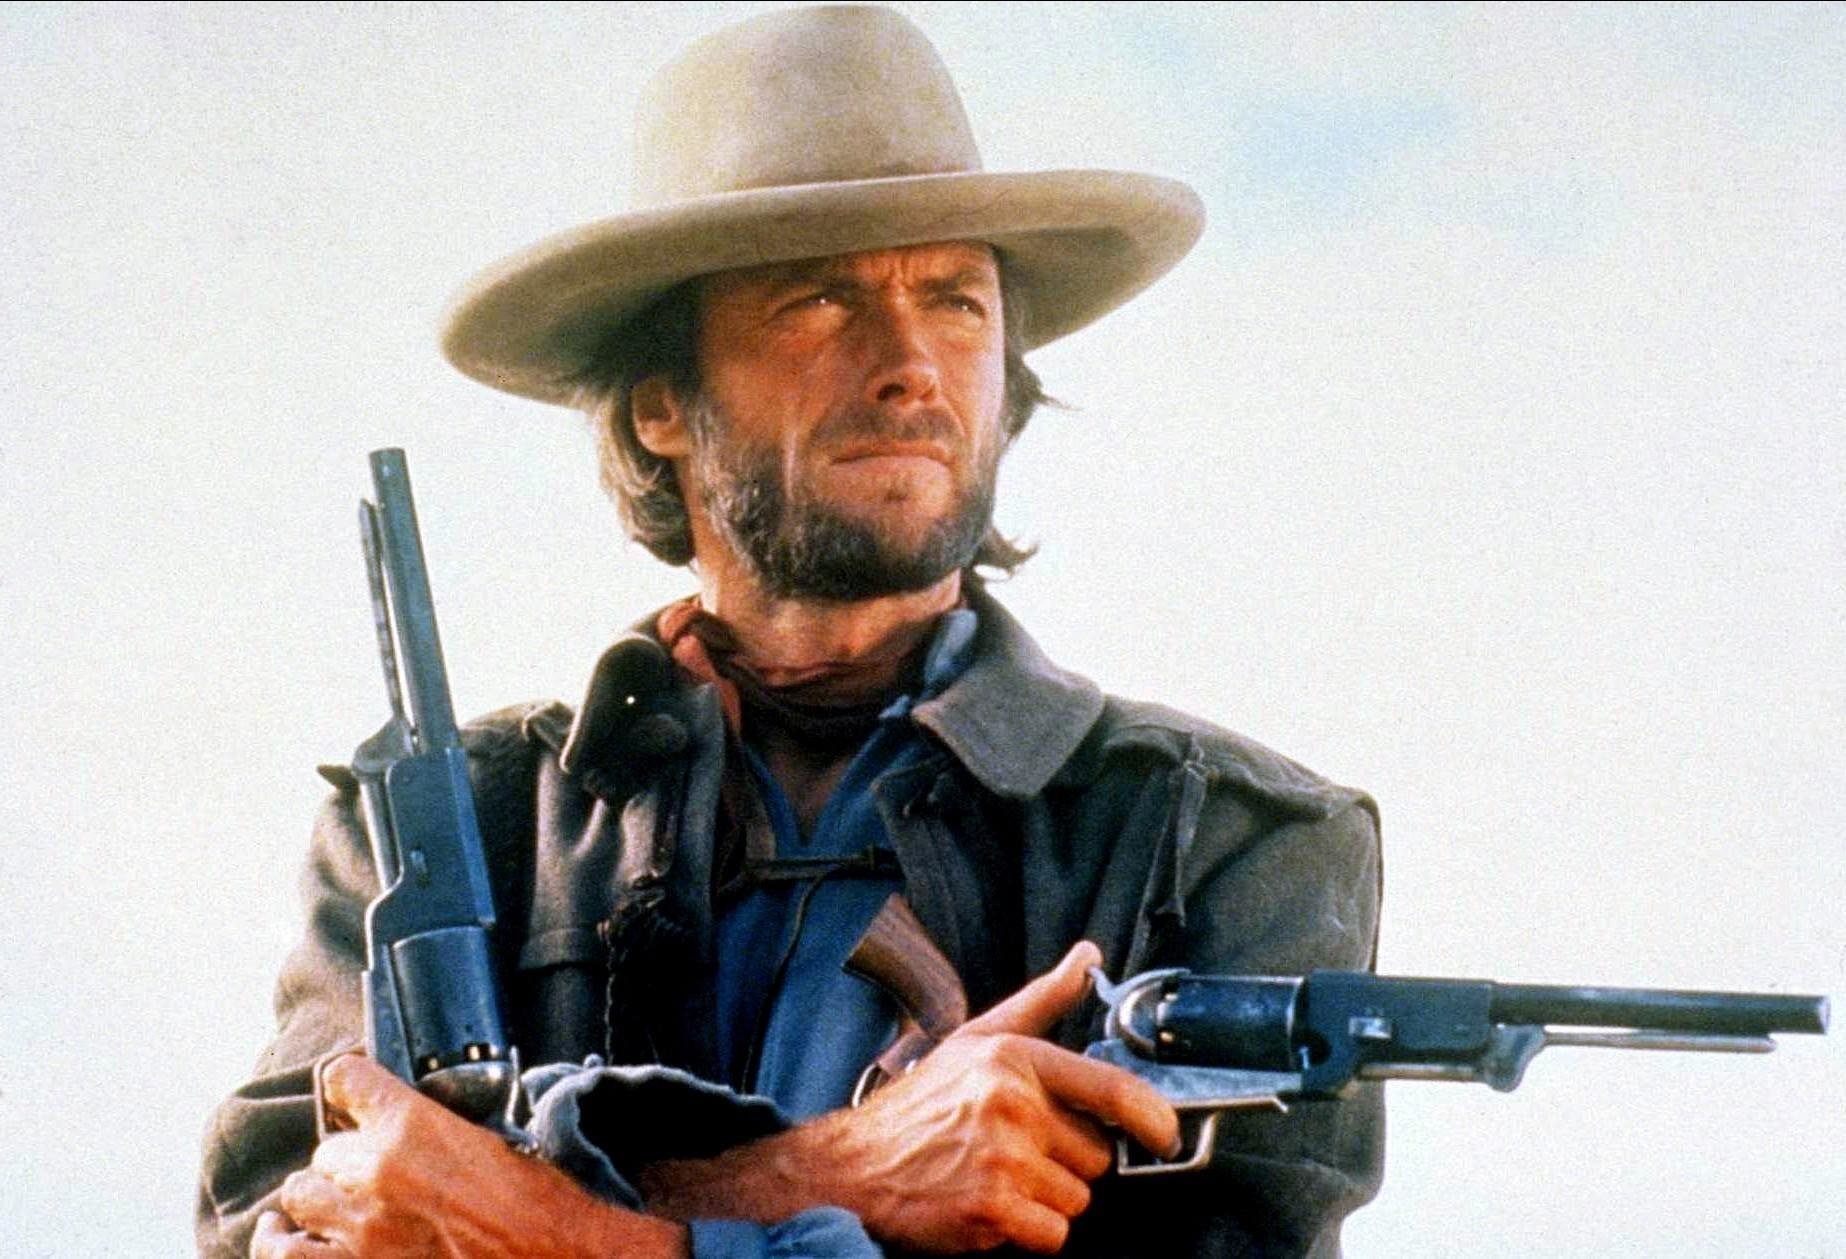 Clint Eastwood holds dual pistols in a classic cowboy get-up